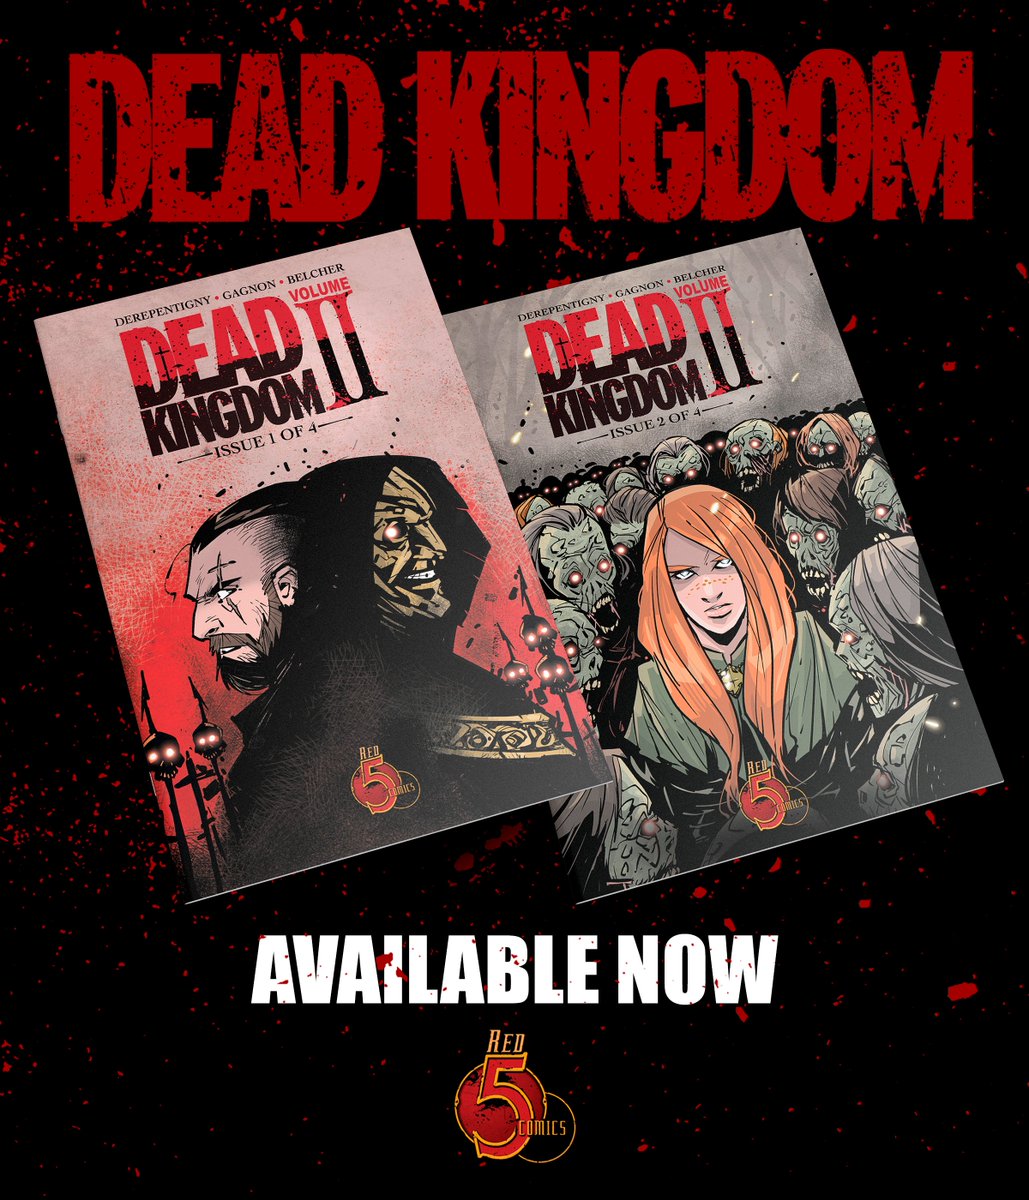 Dead Kingdom Volume 2 issues 1 and 2 are available today, just in time for Valentine's Day. From @red5comics @Comic_Con @Mtlcomiccon @ComicsLotusland @Sparks_Comics @Comics @Paul_thePullbox @blakesbuzz @ComicalOpinions @CBR @ComicCrusaders @TheComicon